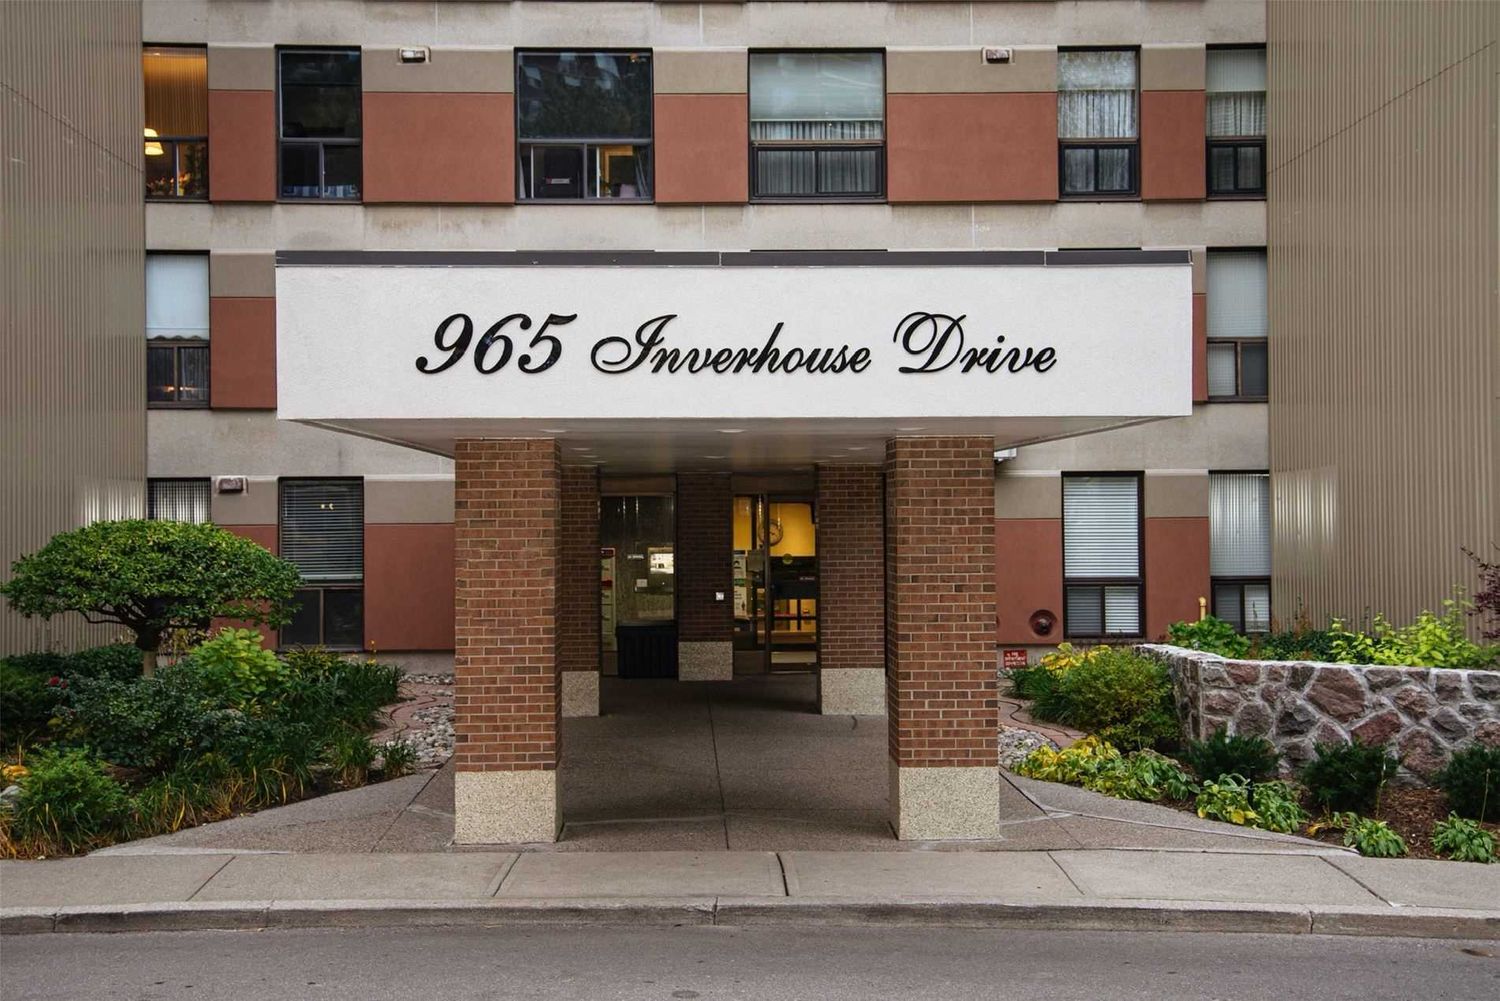 965 Inverhouse Drive. Inverhouse Manor Condos is located in  Mississauga, Toronto - image #2 of 3